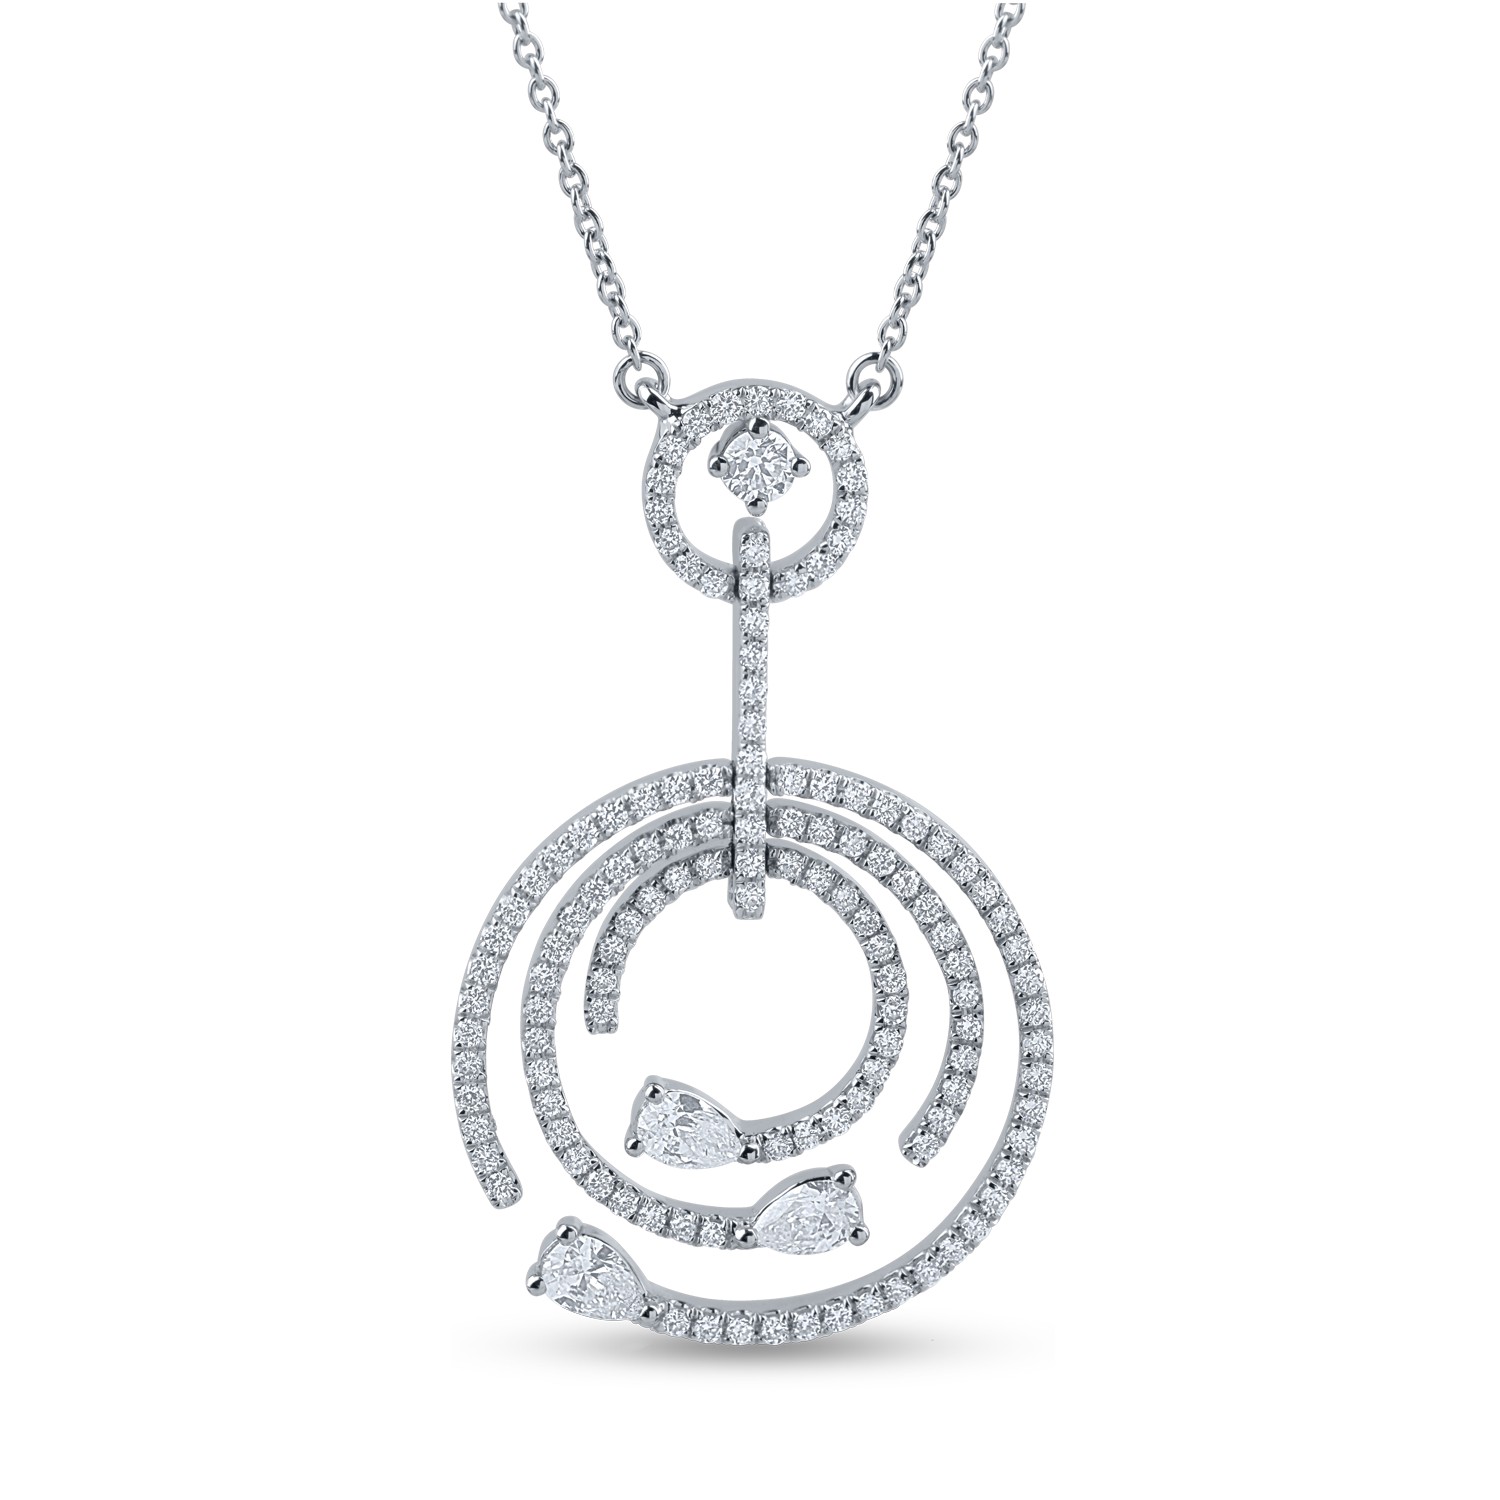 White gold pendant necklace with 1.2ct diamonds